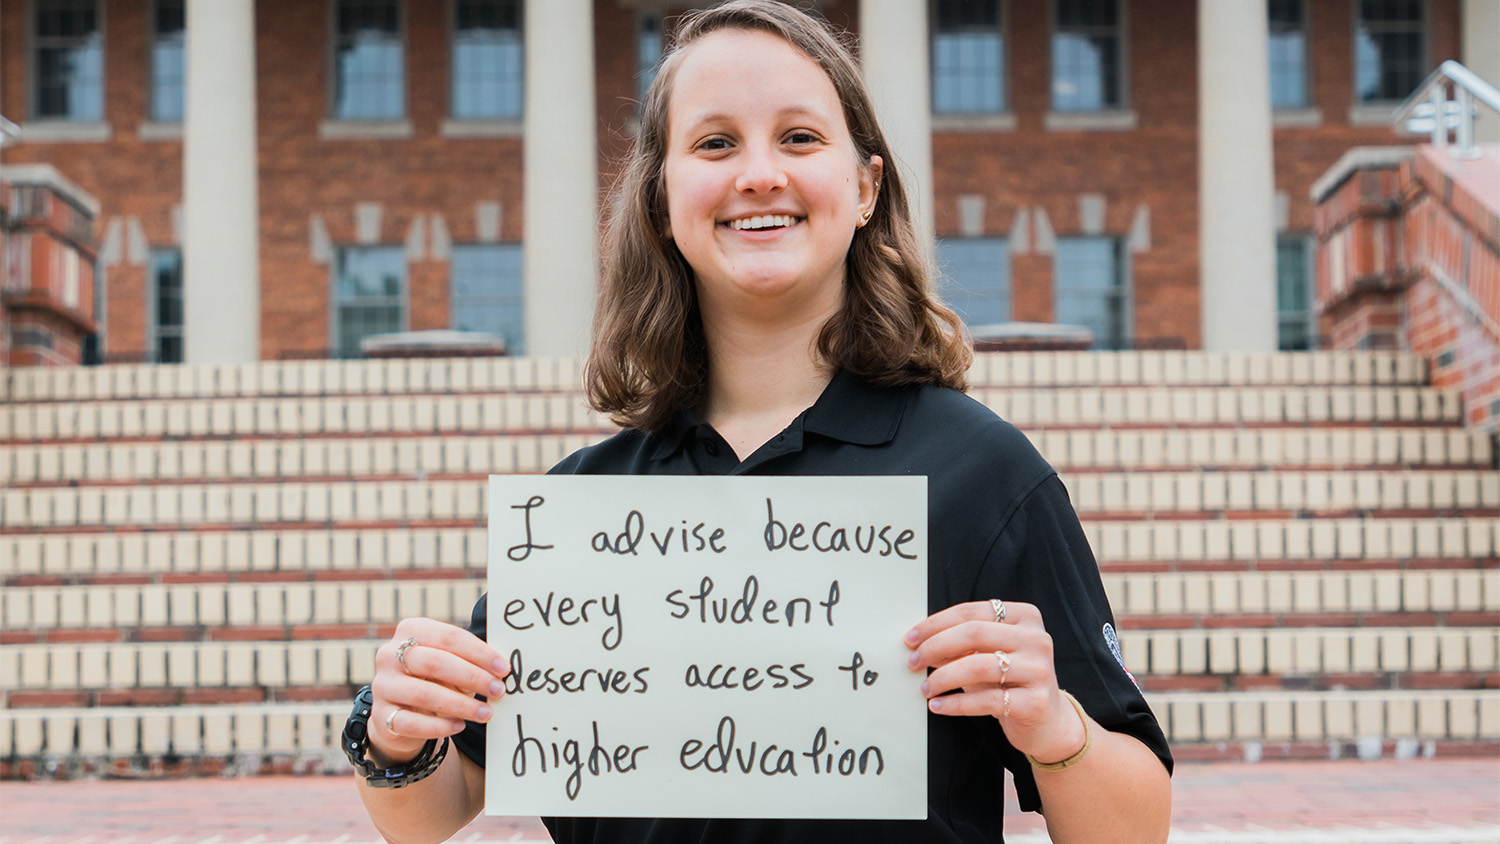 Kiera Lindner holds a sign that reads "I advise because every student deserves access to higher education"